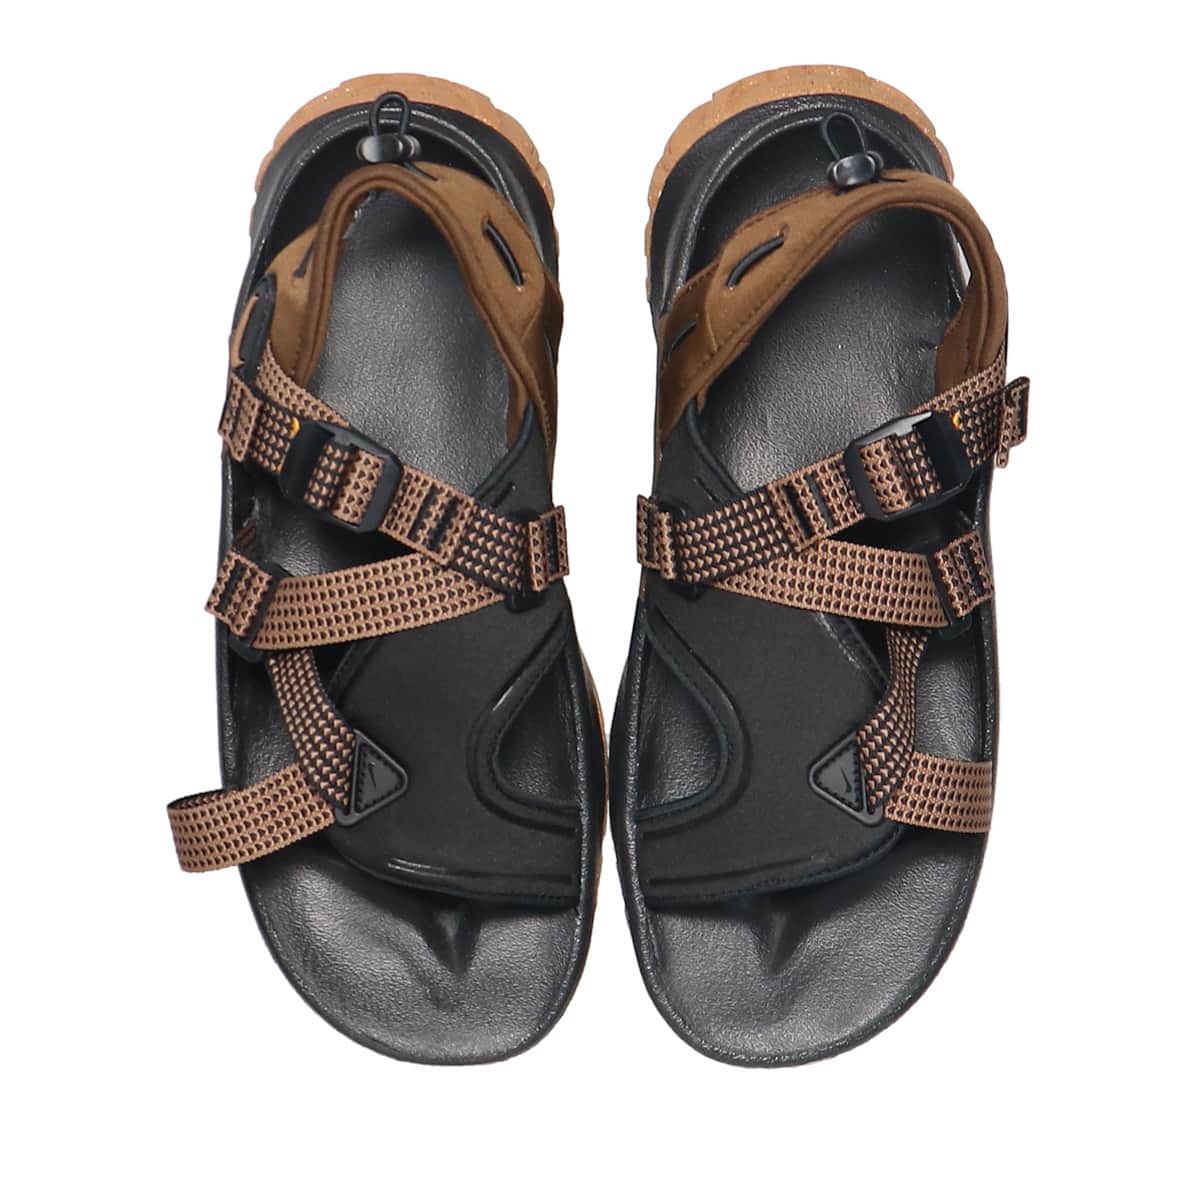 NIKE ONEONTA SANDAL BLACK/GUM MED BROWN-CACAO WOW 22SU-I